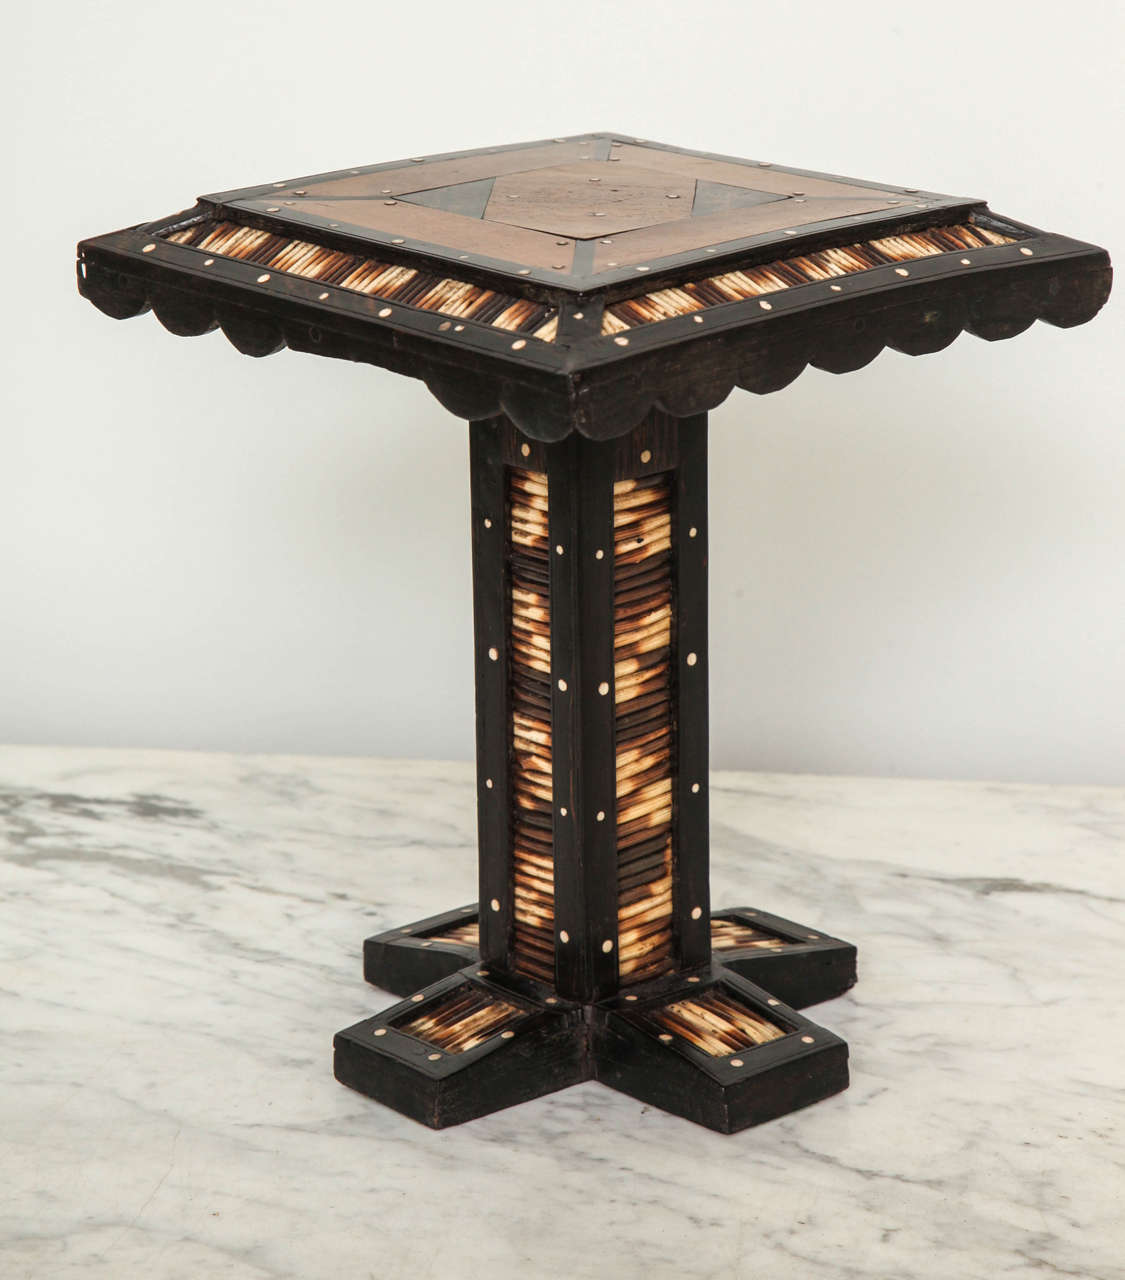 Scarce miniature Ceylonese drinks table, the top inlaid with sandalwood, bone, and ivory, the edge decorated with porcupine quills, the base made from solid ebony with quill ribbing.